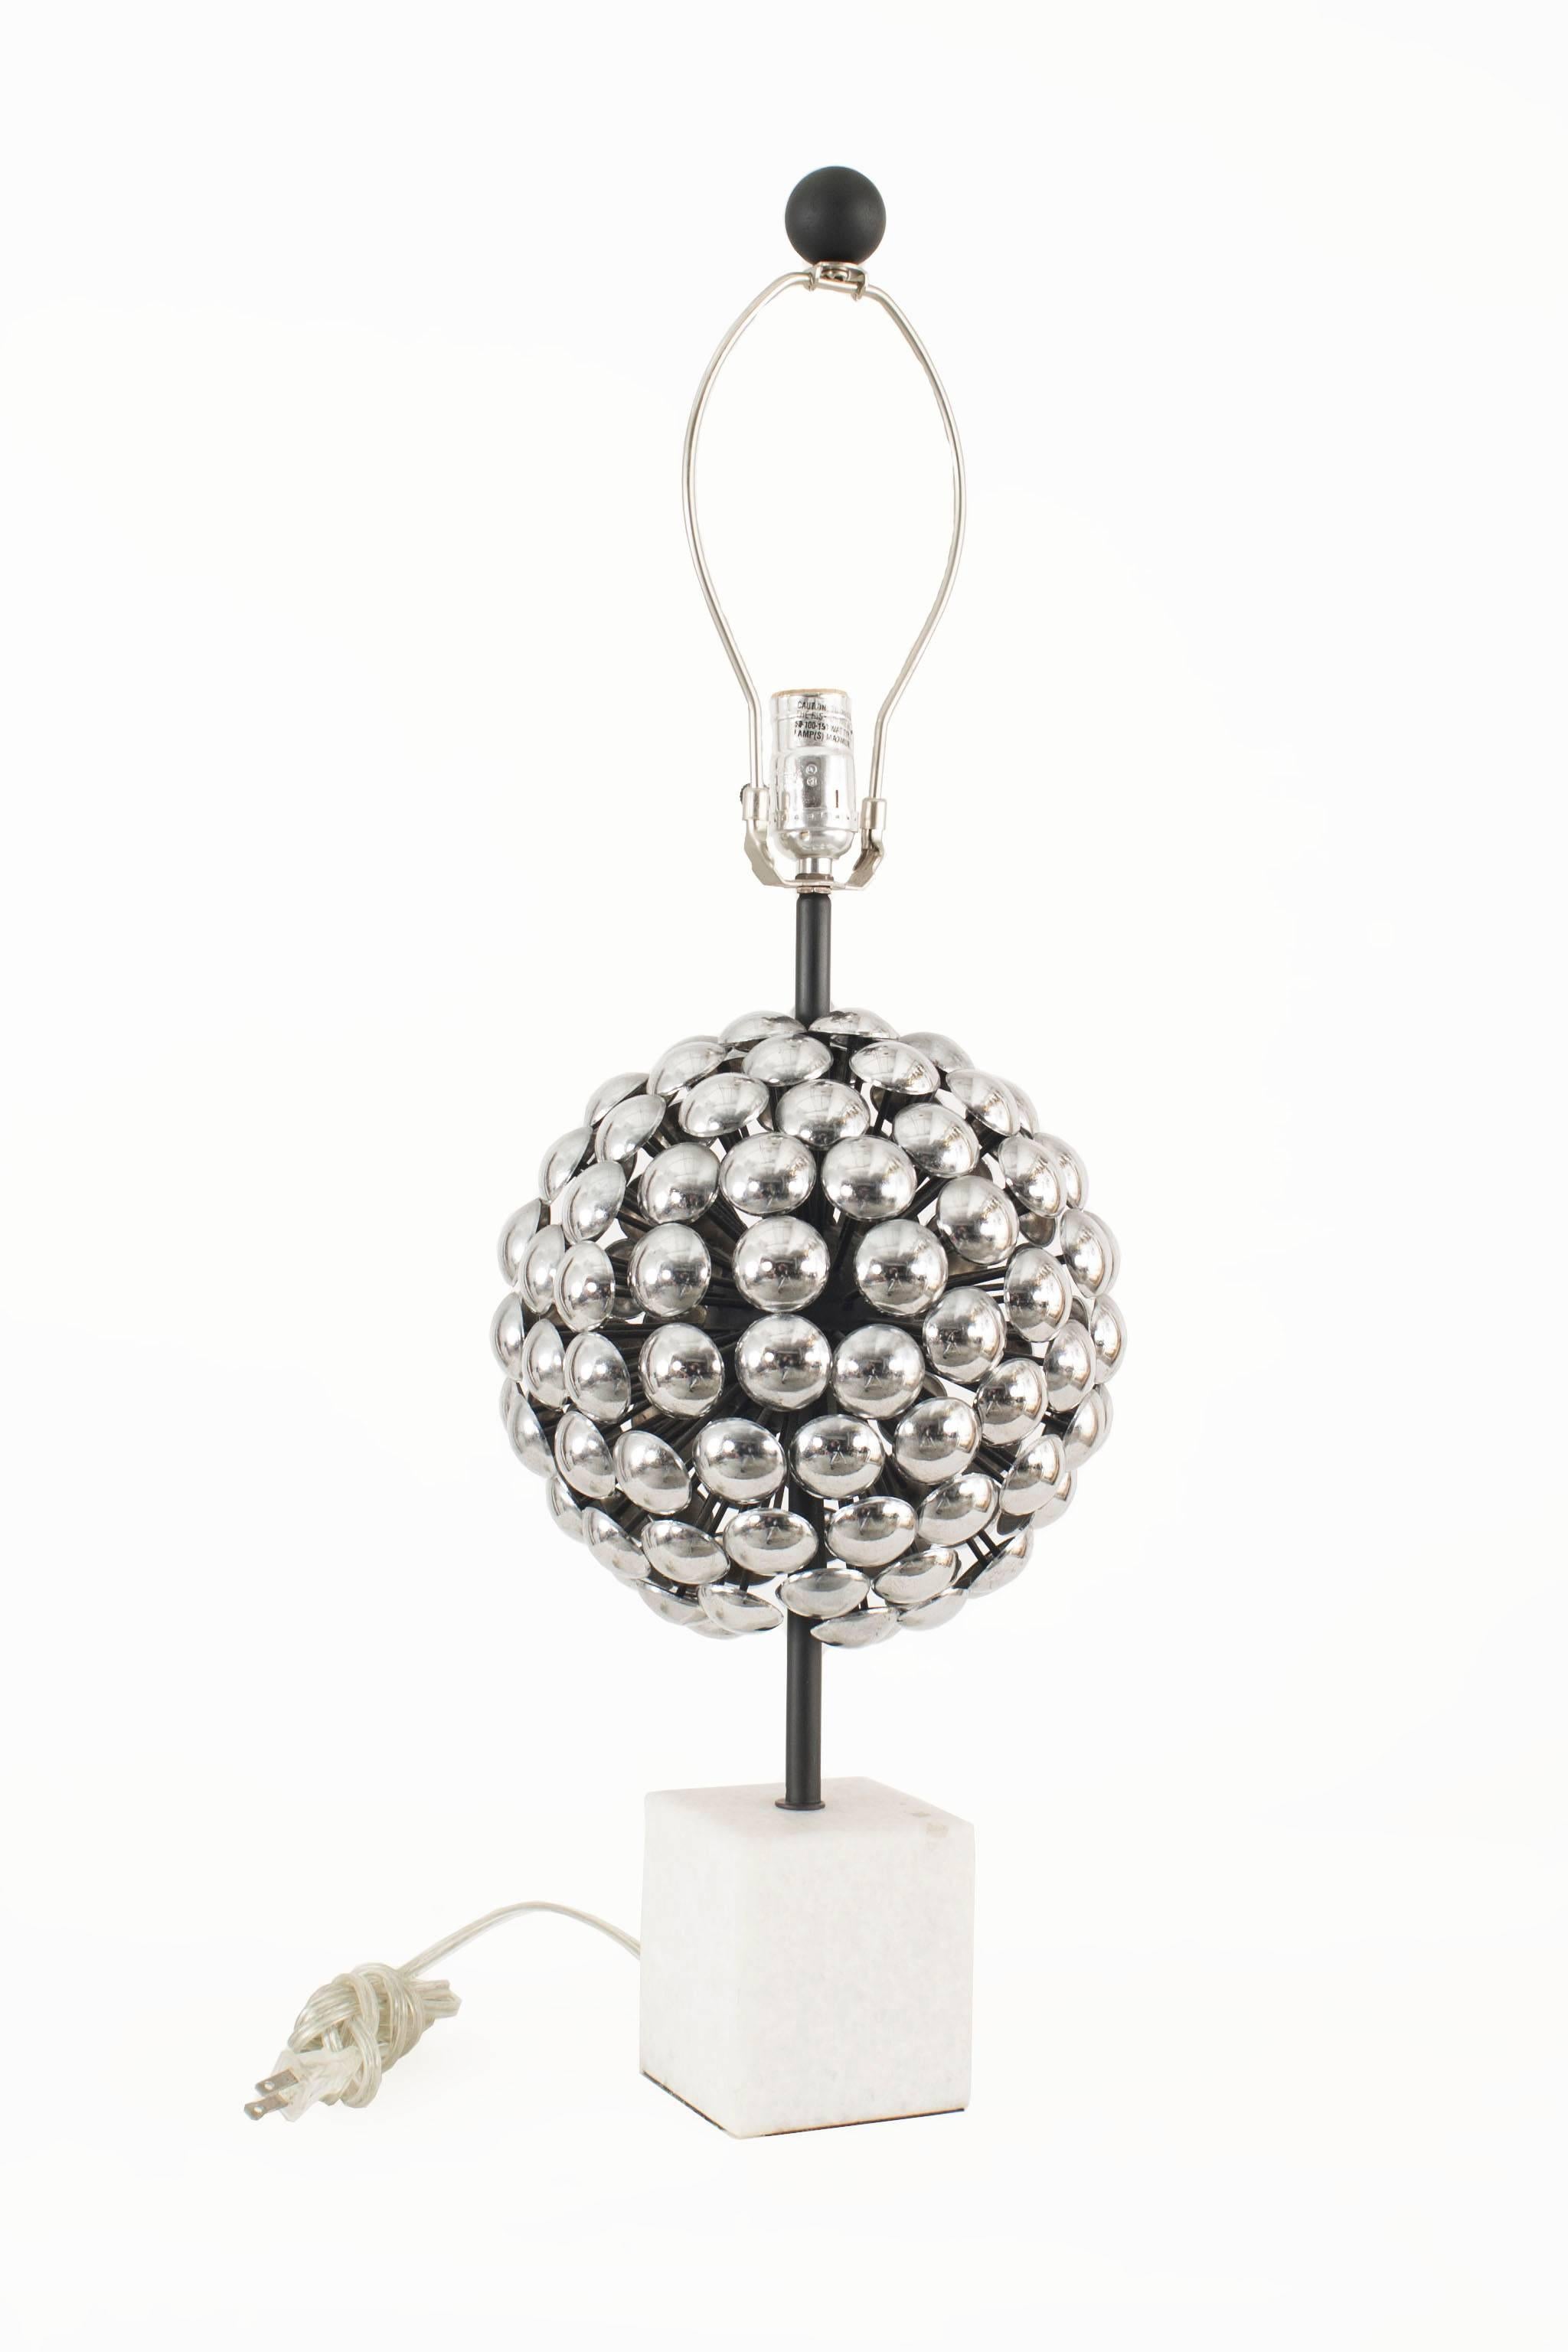 Pair of 1980s (possibly Italian) table lamps with decorative silver metal spheres forming a ball suspended on thin posts resting on square white marble bases. (Shades not included).

 